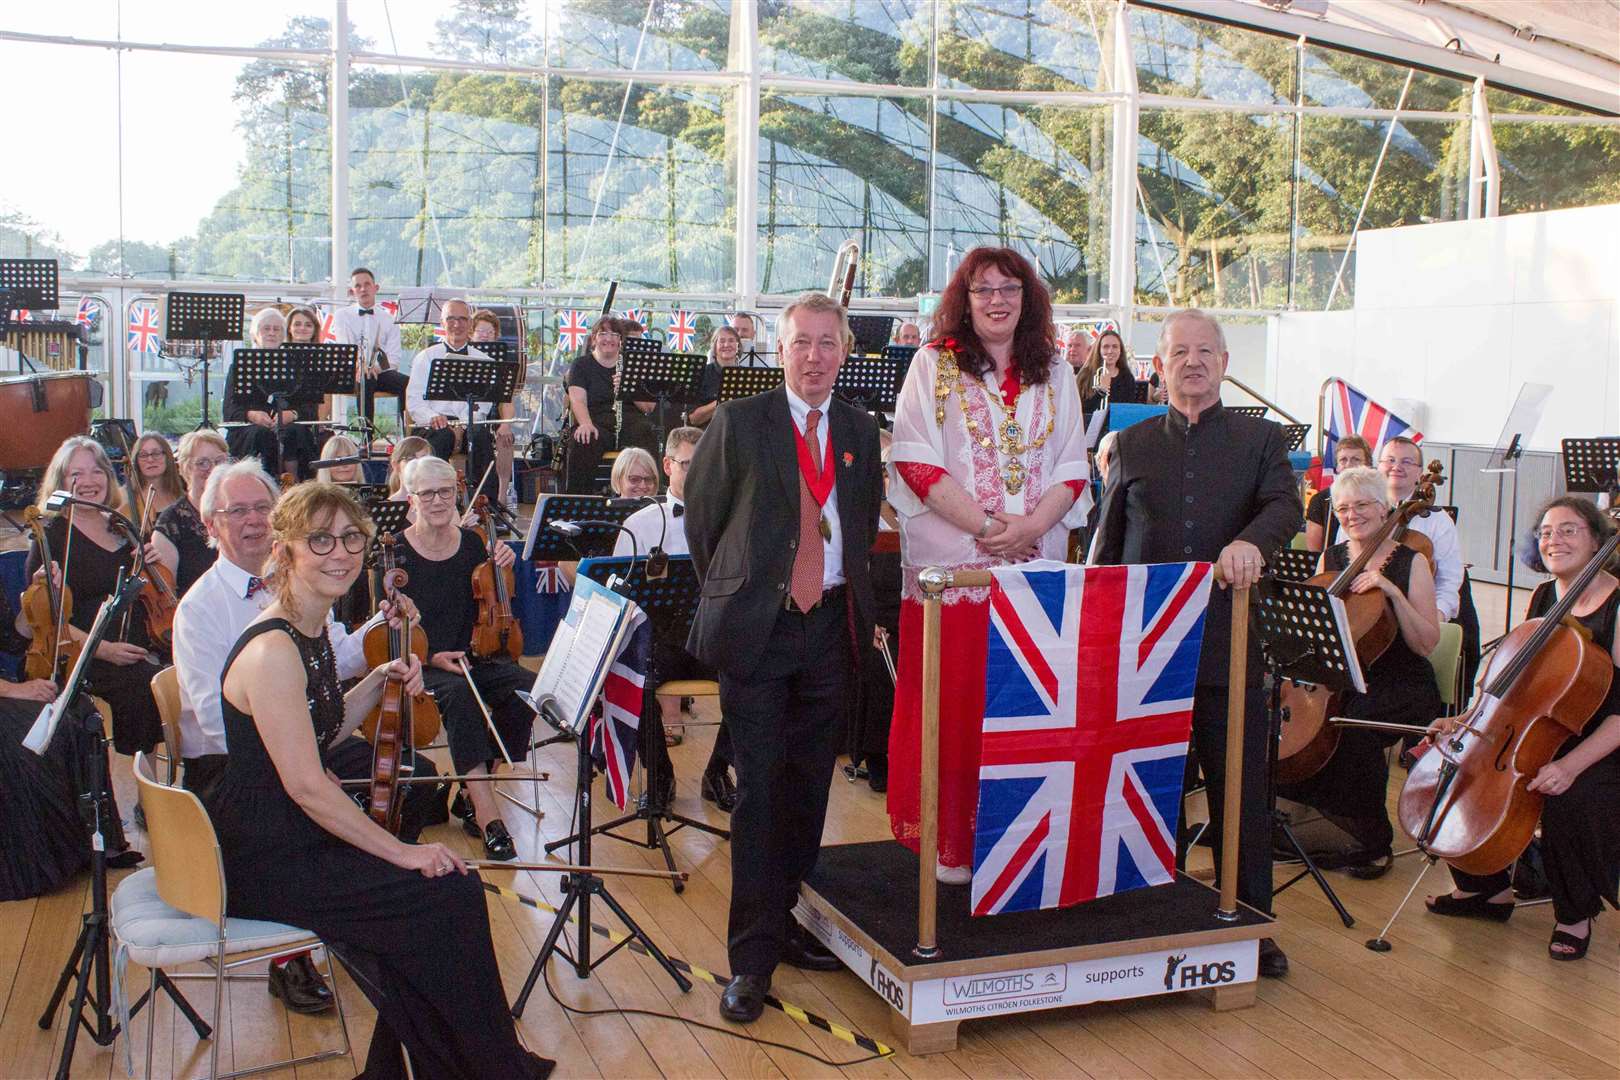 The Folkestone Symphony orchestra performing back in August. Photo: Brian Gould